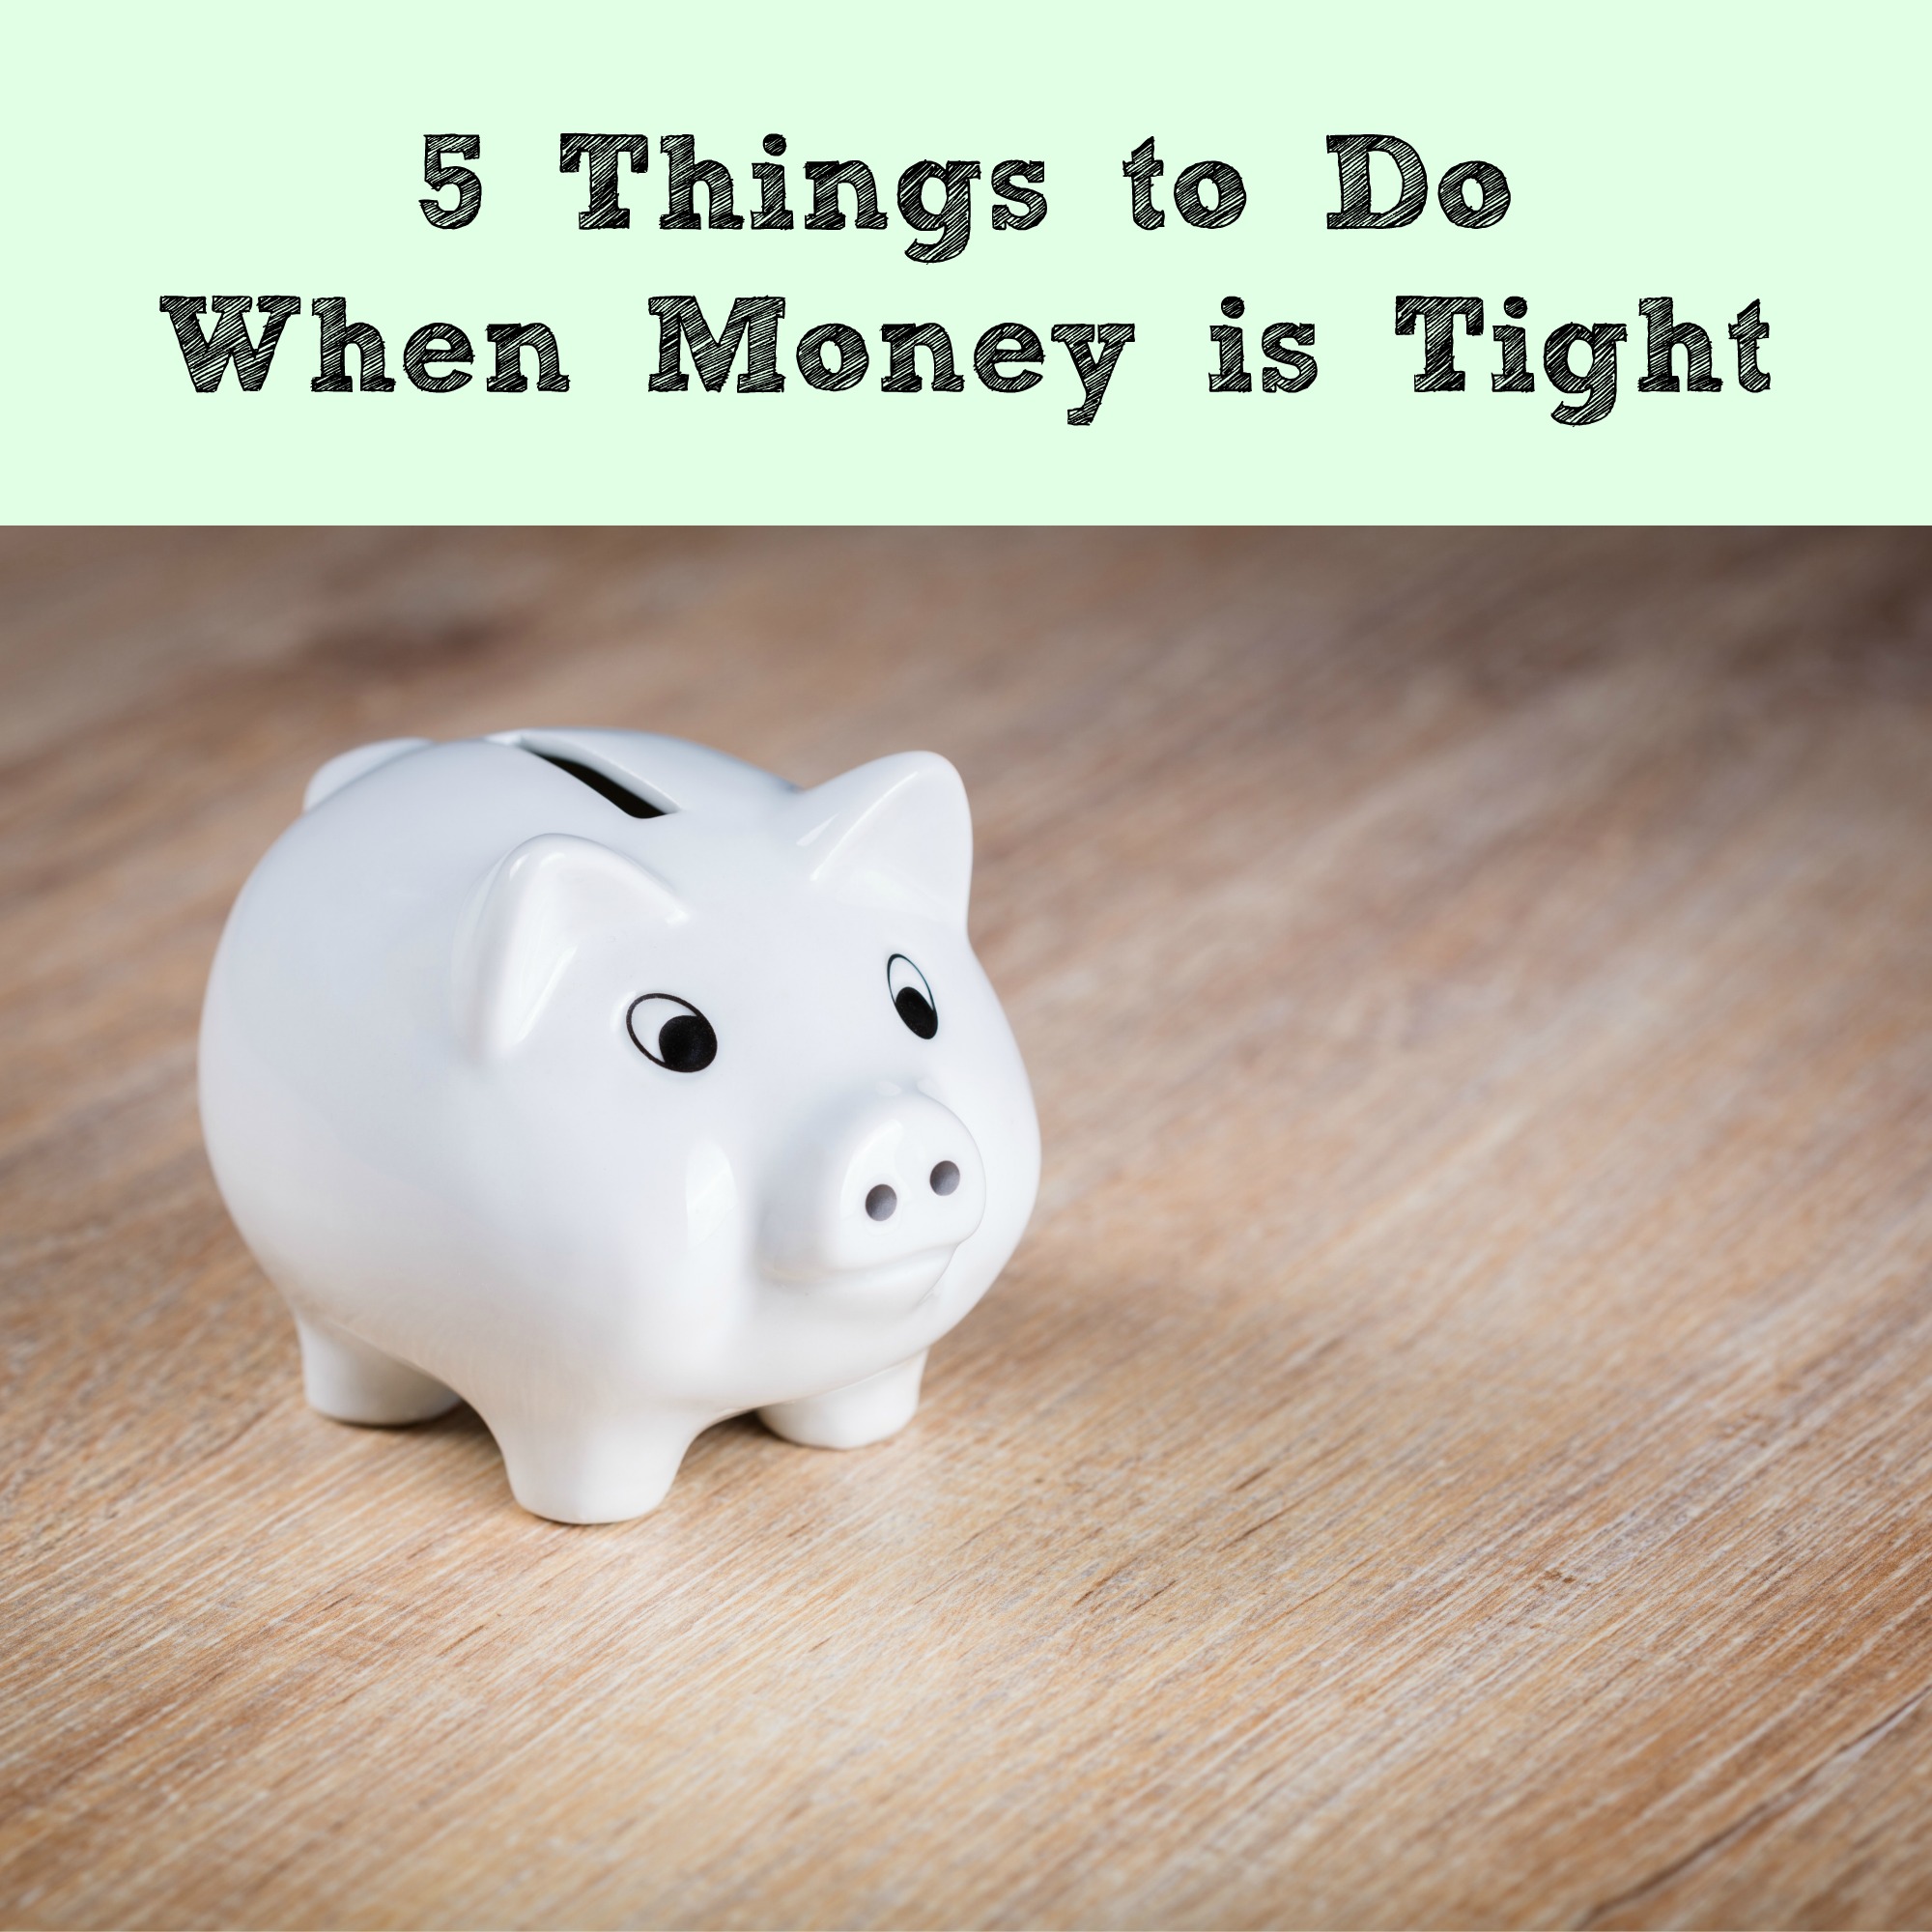 5 Things to Do When Money is Tight